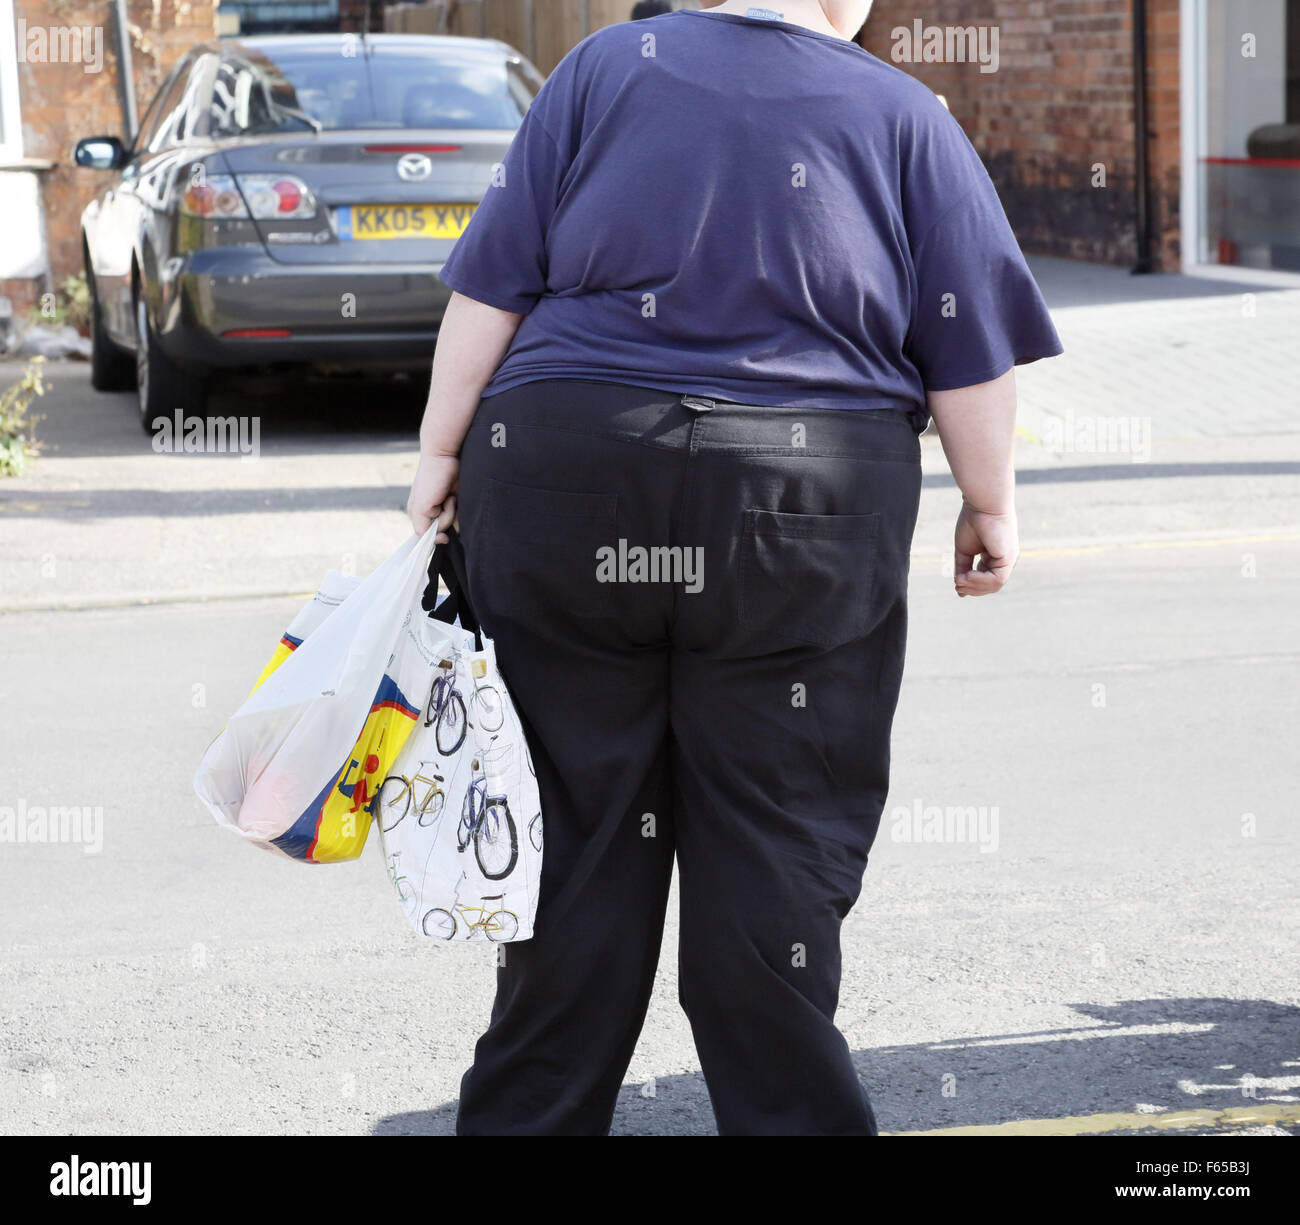 Obese woman. Stock Photo